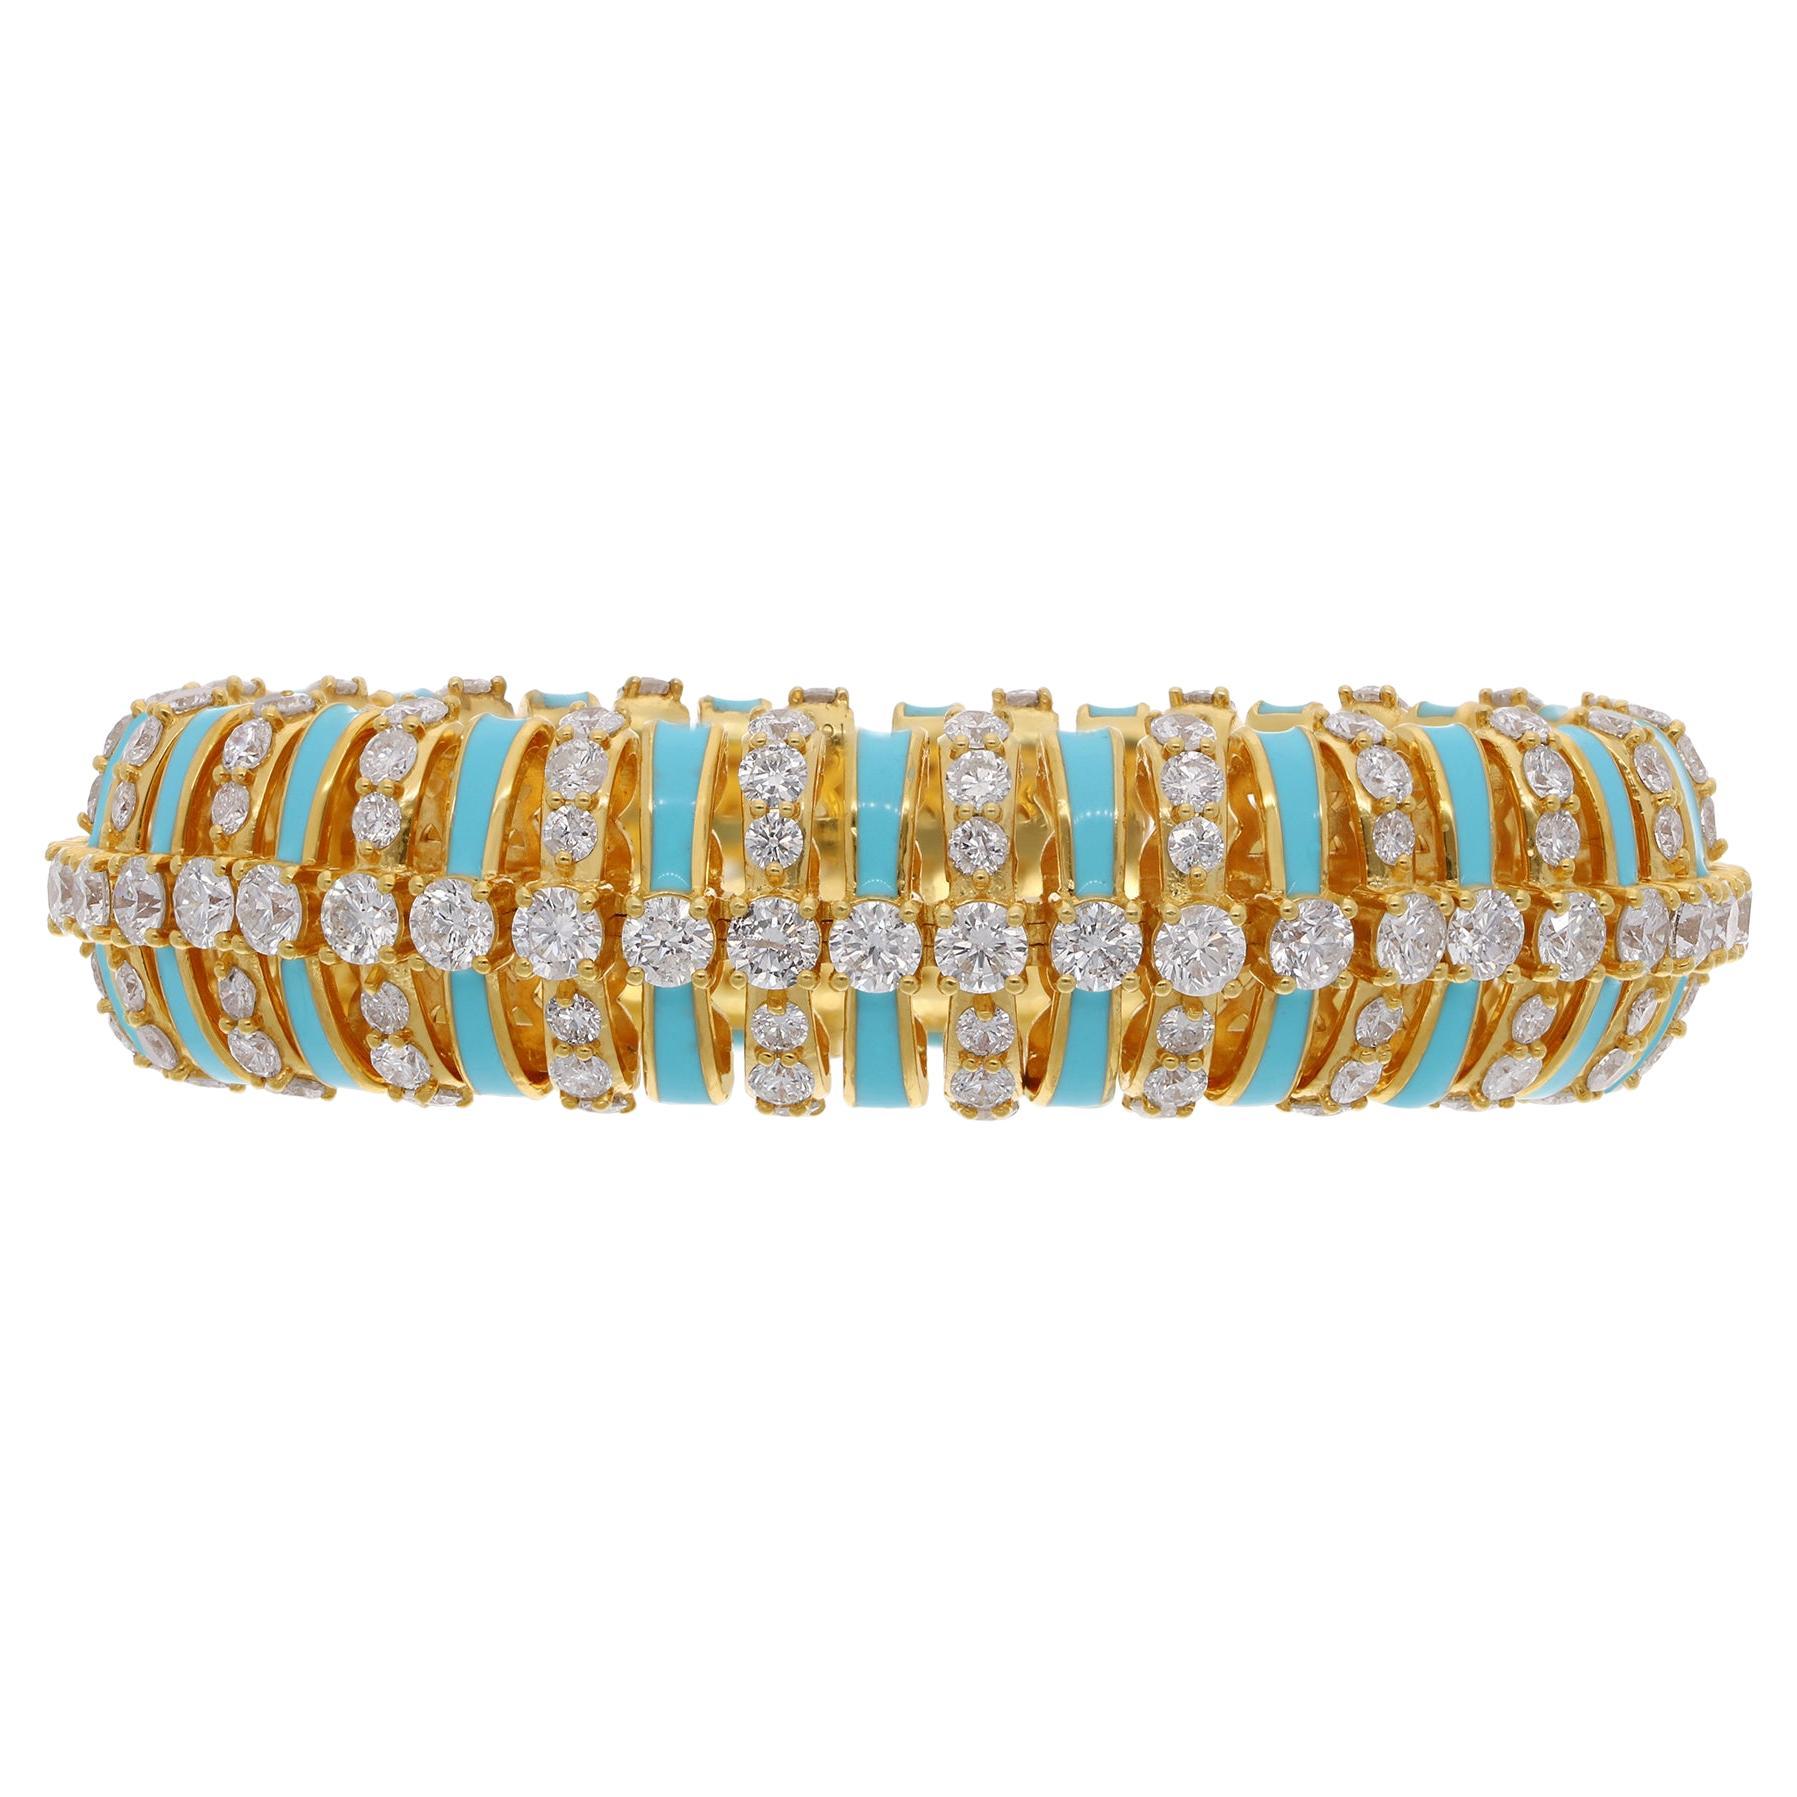 18K Gold Bracelet with 10 Carat of G Color SI1 Clarity Brilliant Cut ...